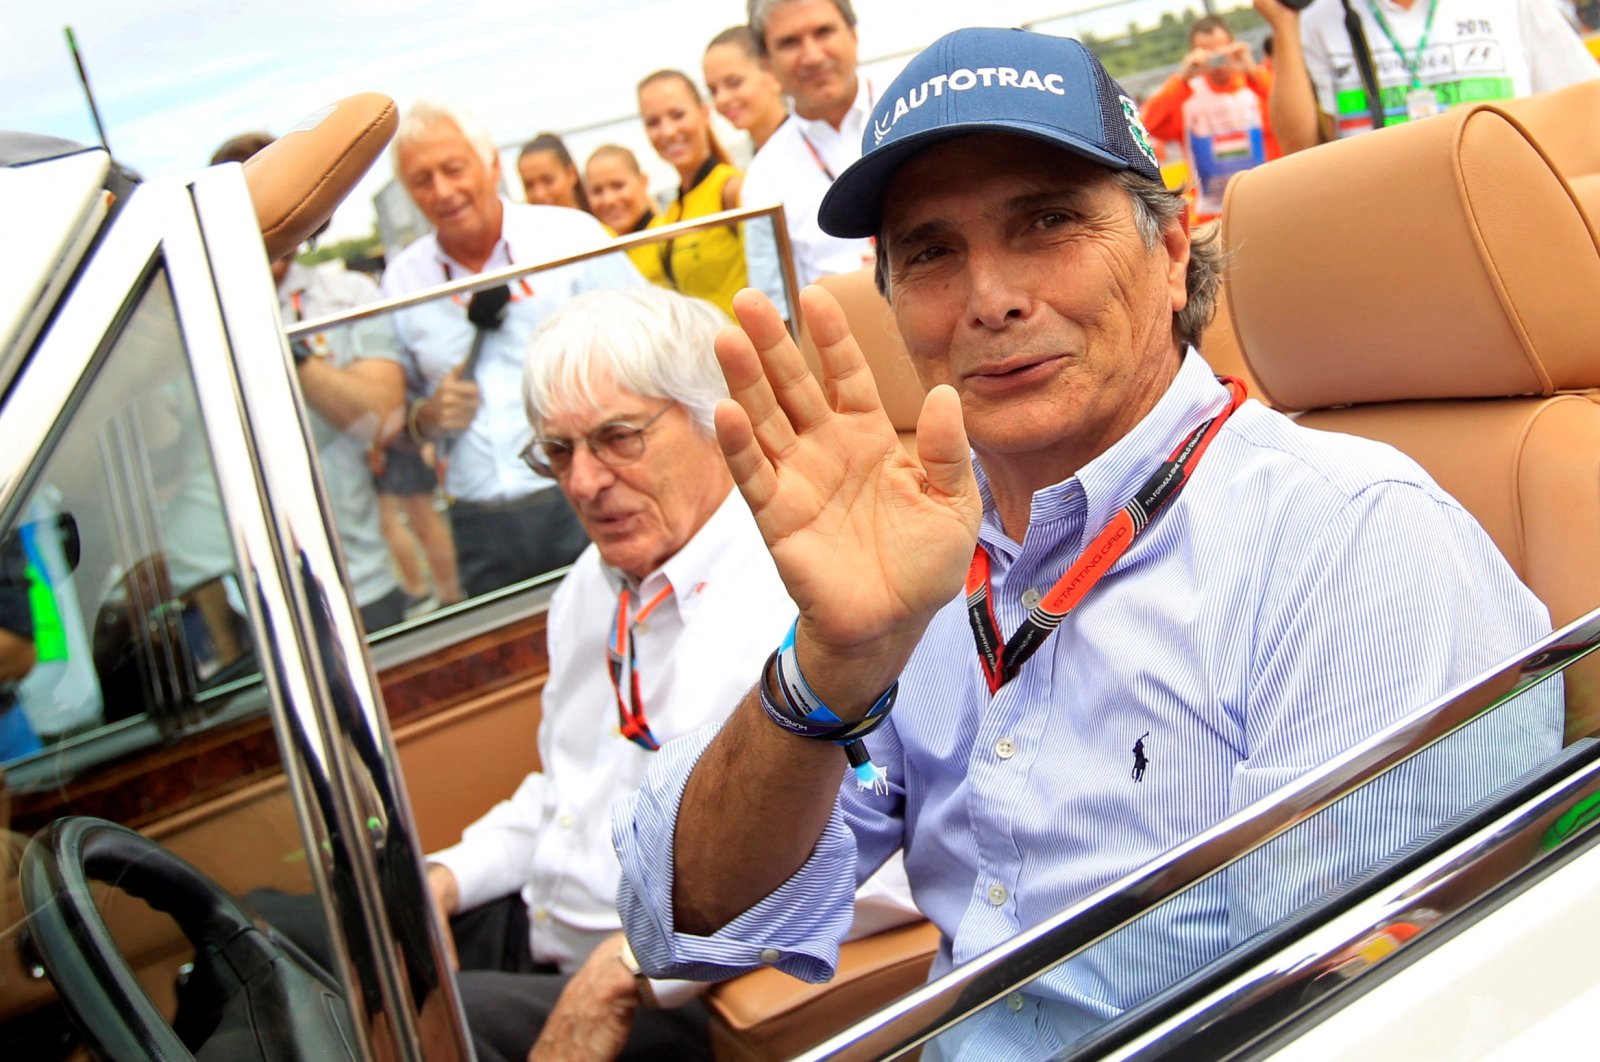 Former F1 driver Nelson Piquet of Brazil (R) and F1 boss Bernie Ecclestone at the Hungarian GP, Budapest, Hungary, July 26, 2015. (Reuters Photo)